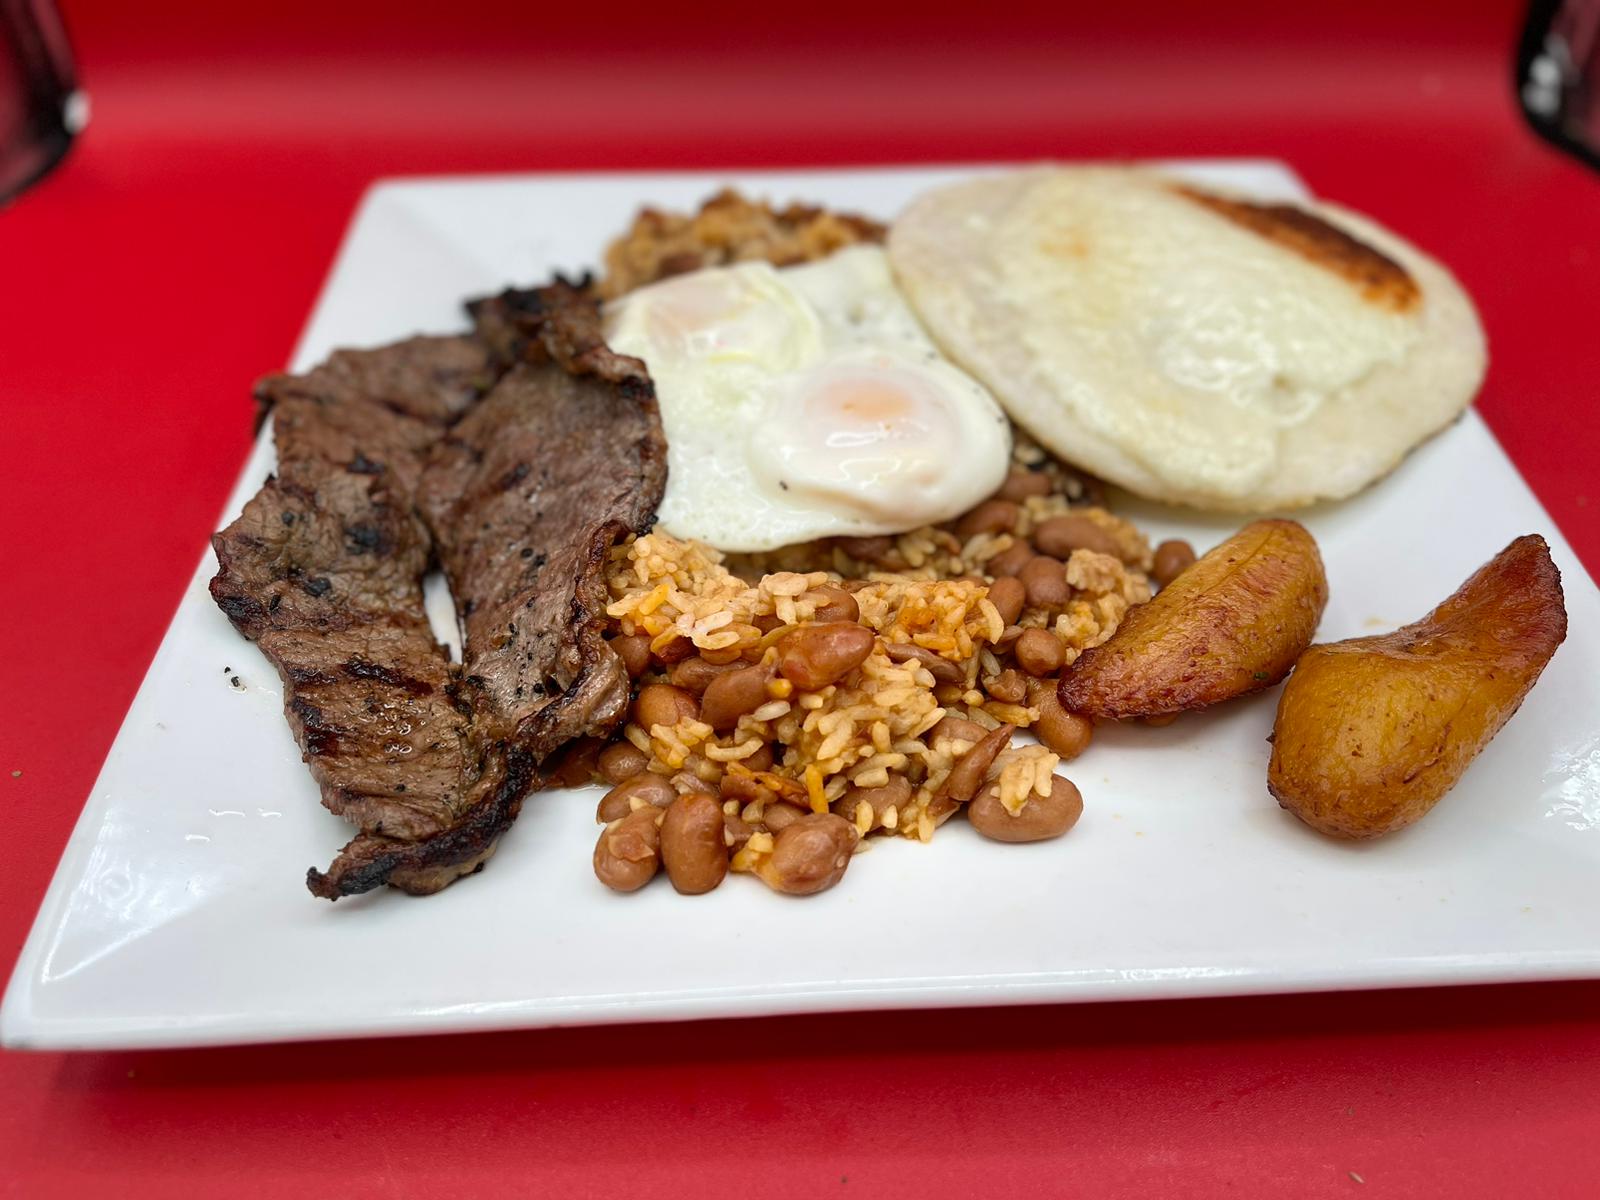 A plate with steak, beans and eggs on it.